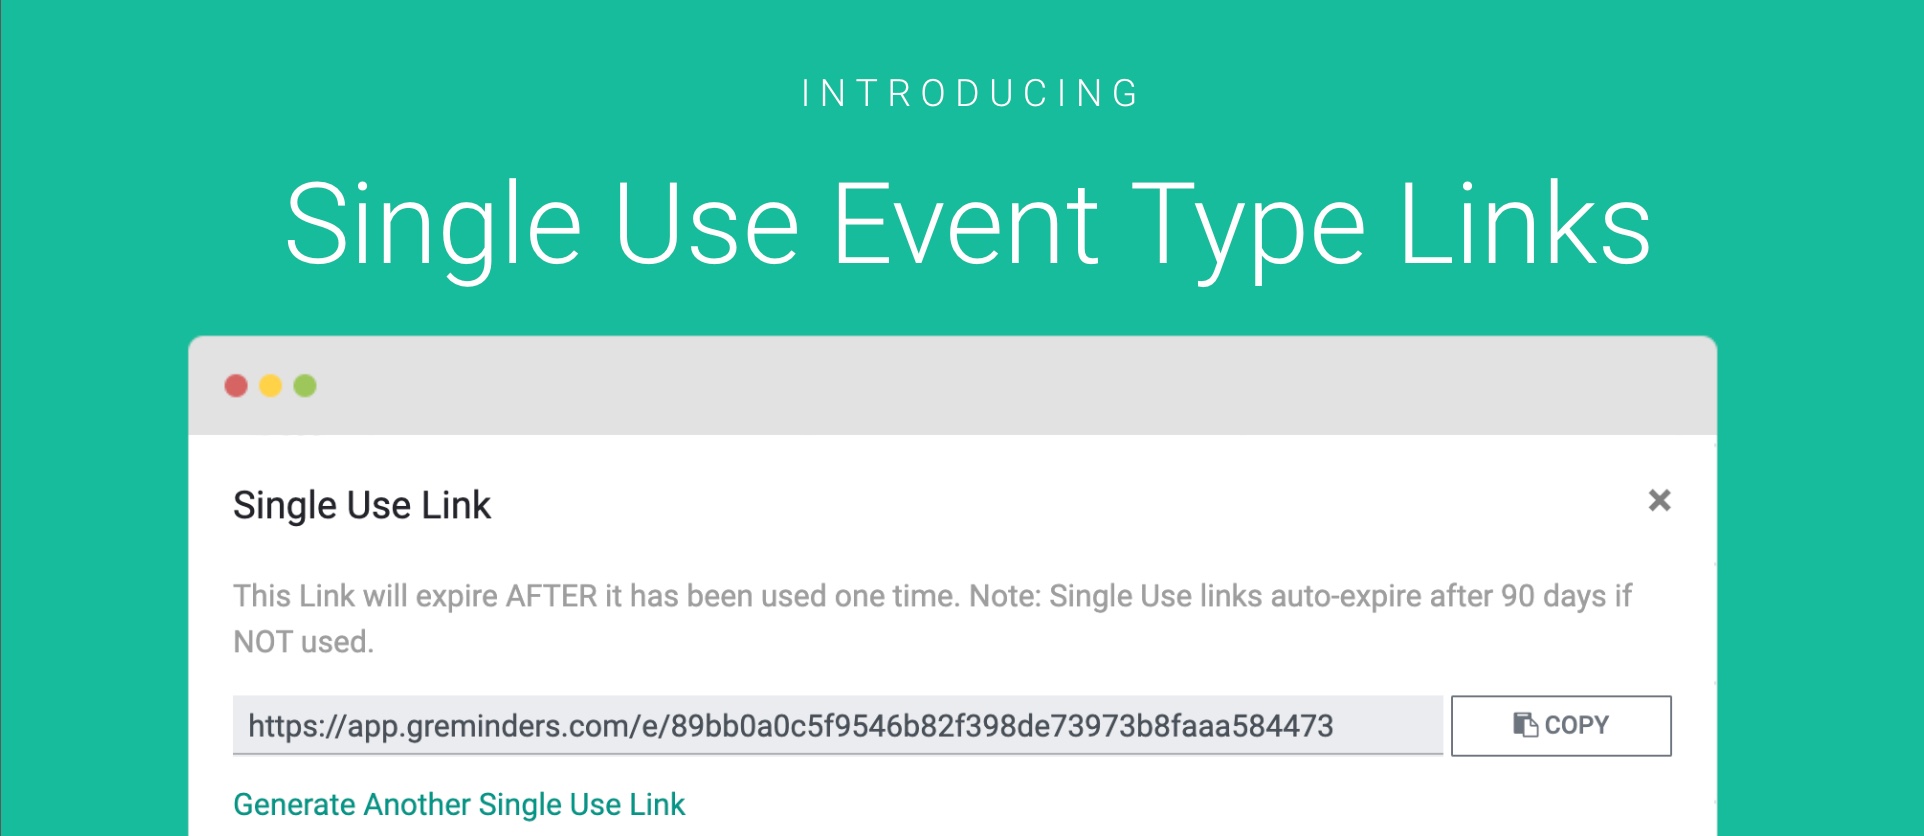 Single Use Event Type Links